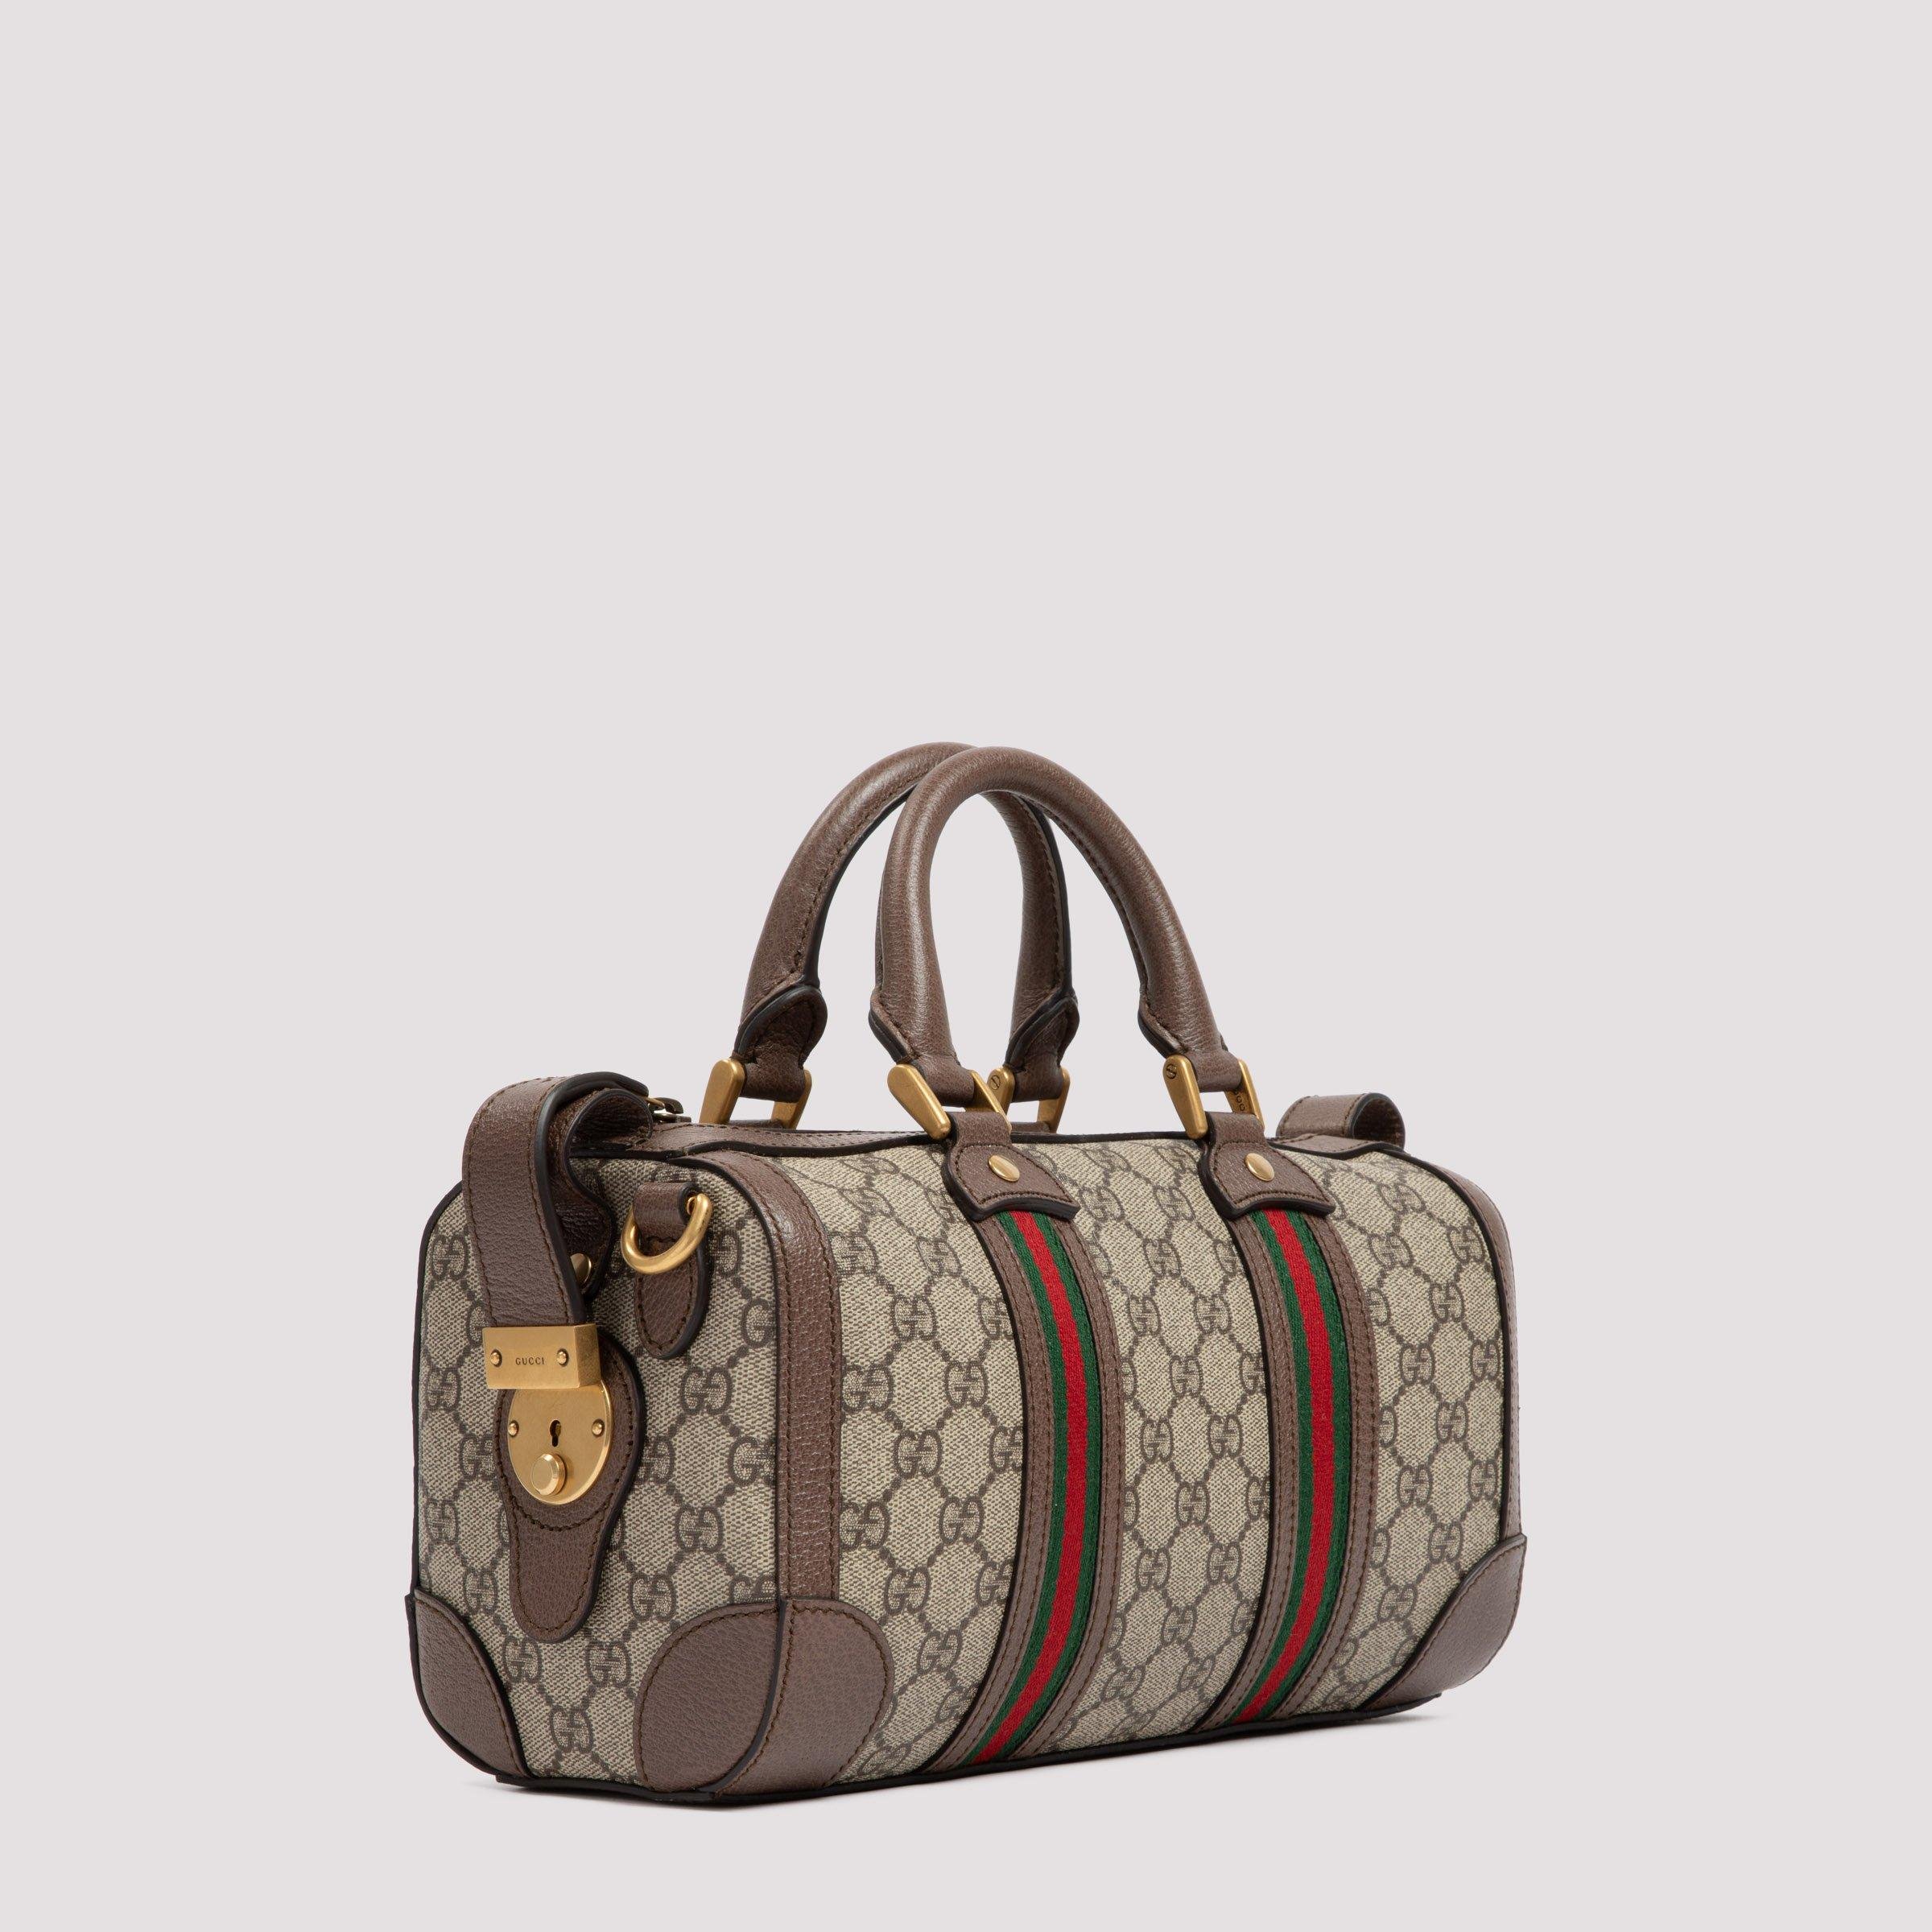 GG Leather Duffel Bag in Brown - Gucci